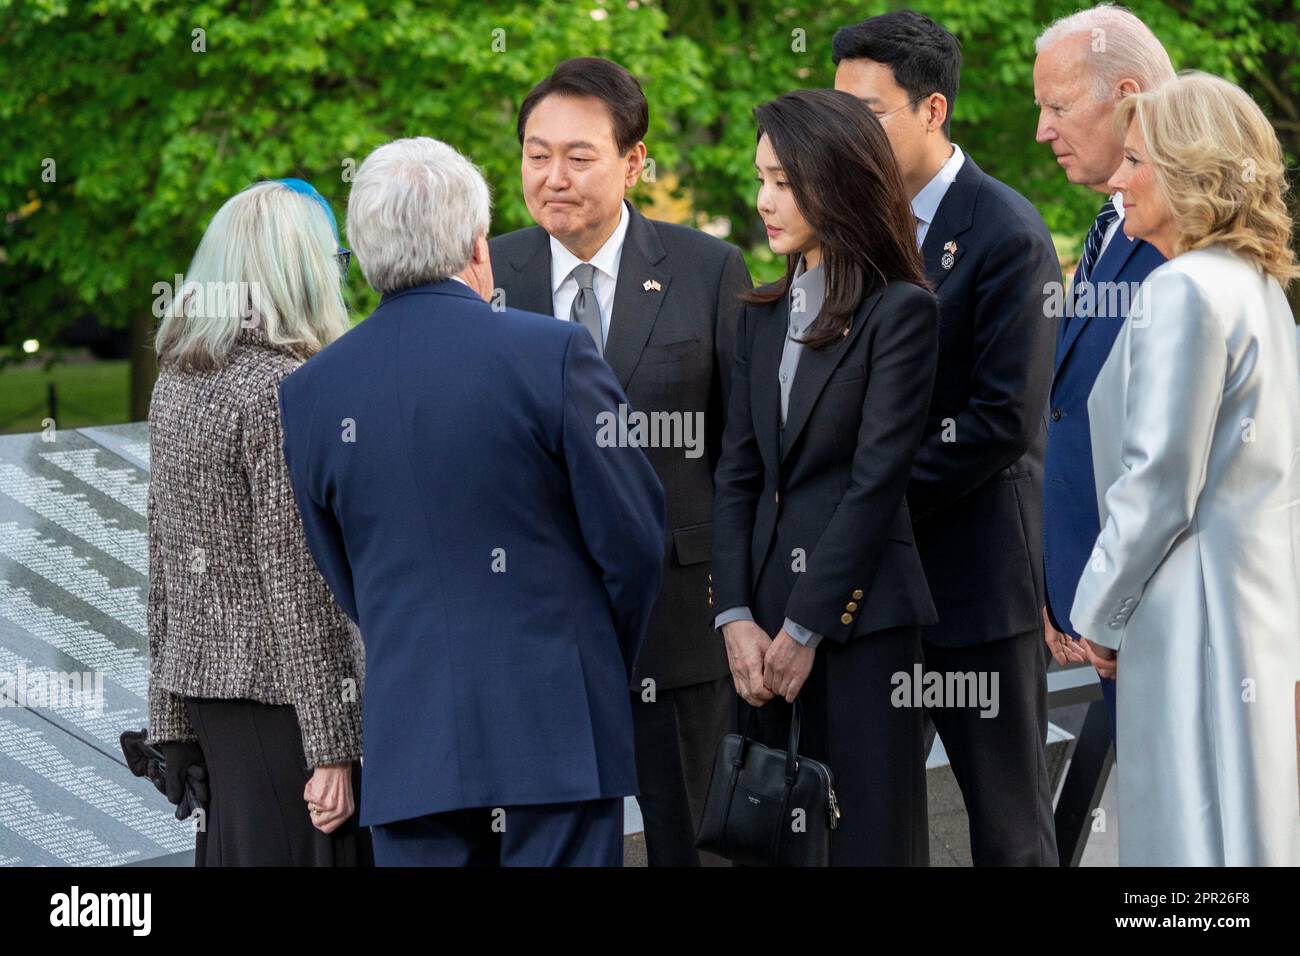 Washington, DC, USA. 25th Apr, 2023. President Joe Biden and First Lady Jill Biden with President Yoon Suk Yeol of the Republic of Korea and Mrs. Kim Keon Hee, First Lady of the Republic of Korea, talk with with Judy Wade, the niece of Medal of Honor recipient Corporal Luther Story, and her spouse Joseph Wade during a visit to the Korean War Memorial in Washington, DC, USA, 25 April 2023. Tomorrow President Biden will host a State Visit for President Yoon Suk Yeol of the Republic of Korea. Credit: Shawn Thew/Pool via CNP/dpa/Alamy Live News Stock Photo